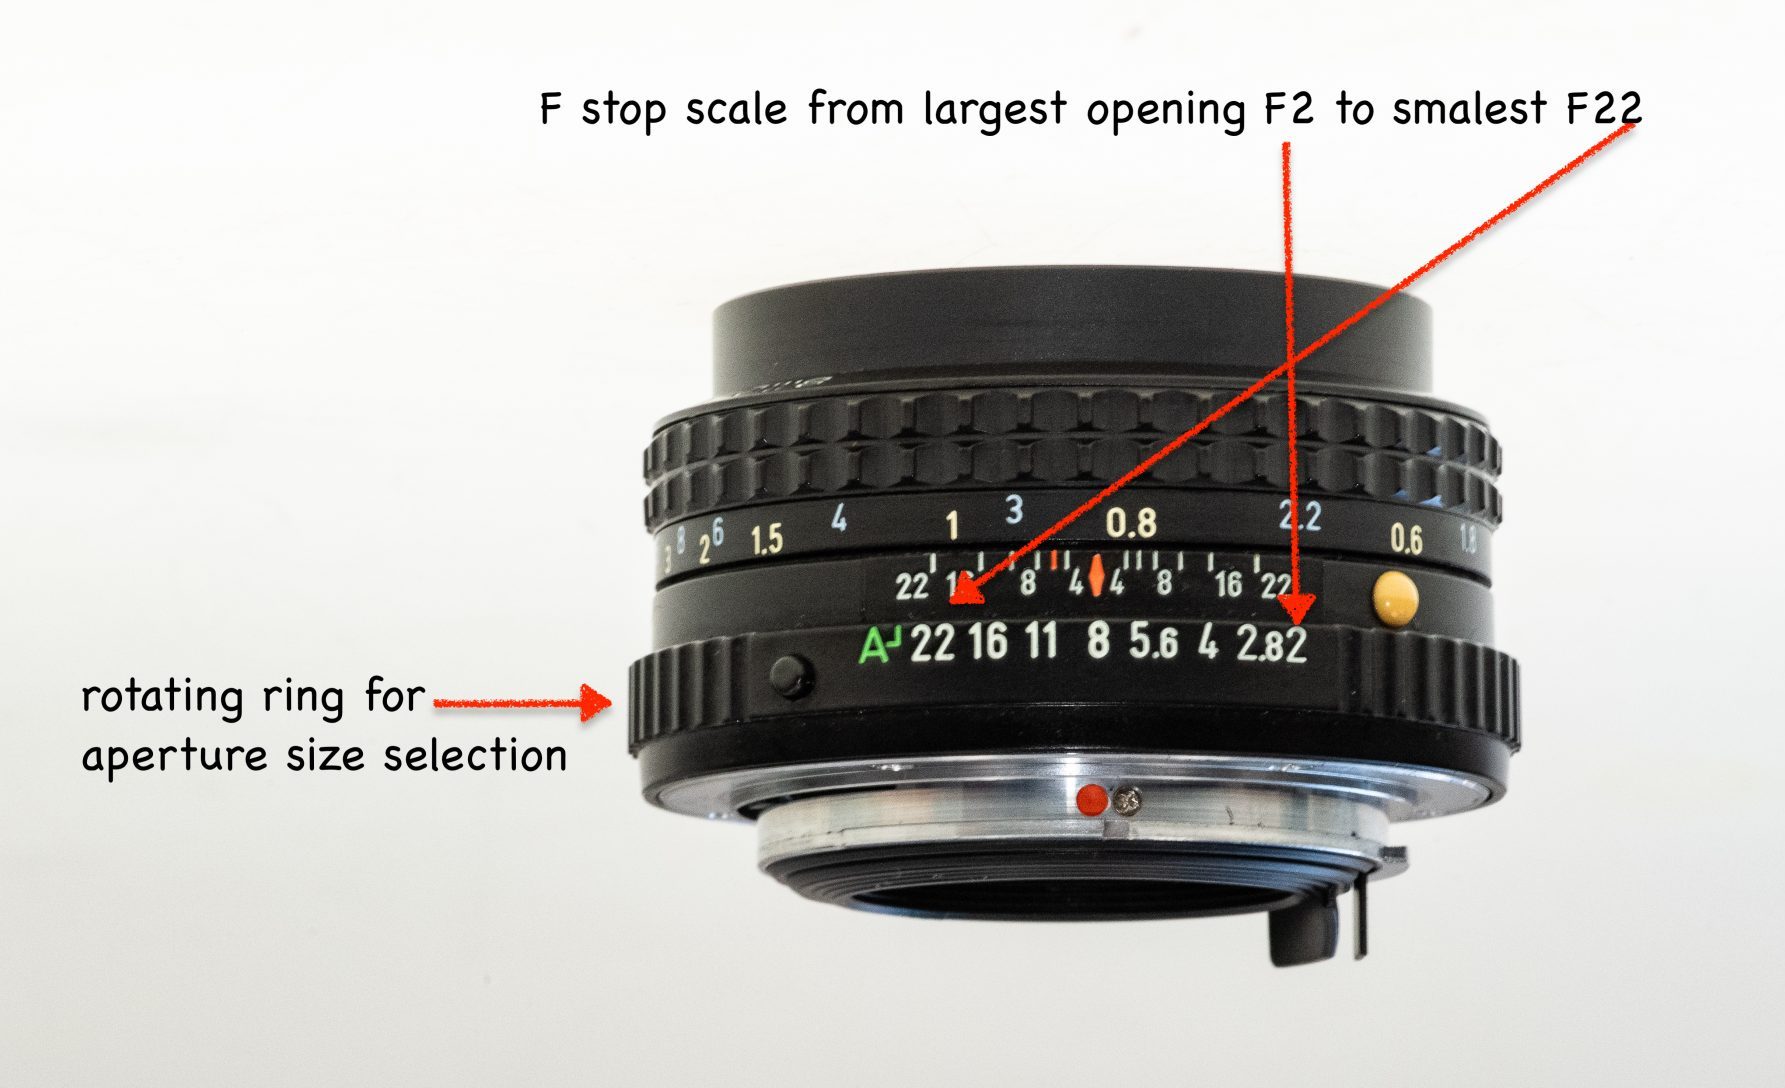 top:50mm lens showing f stops from f2 to f22bottom: rotating ring for aperture size selection